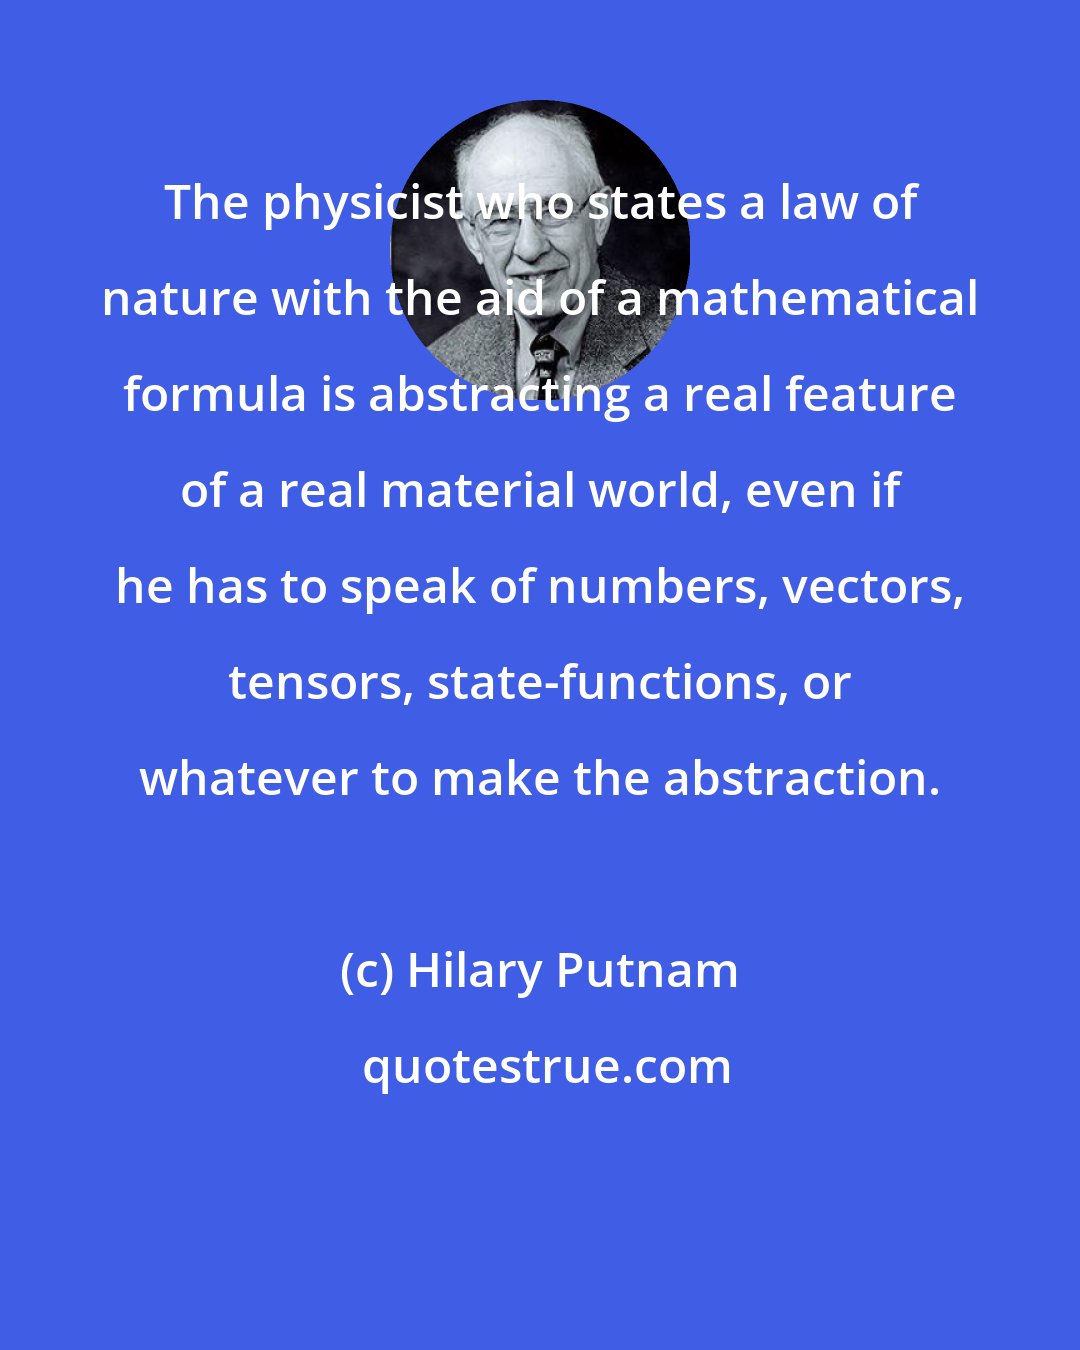 Hilary Putnam: The physicist who states a law of nature with the aid of a mathematical formula is abstracting a real feature of a real material world, even if he has to speak of numbers, vectors, tensors, state-functions, or whatever to make the abstraction.